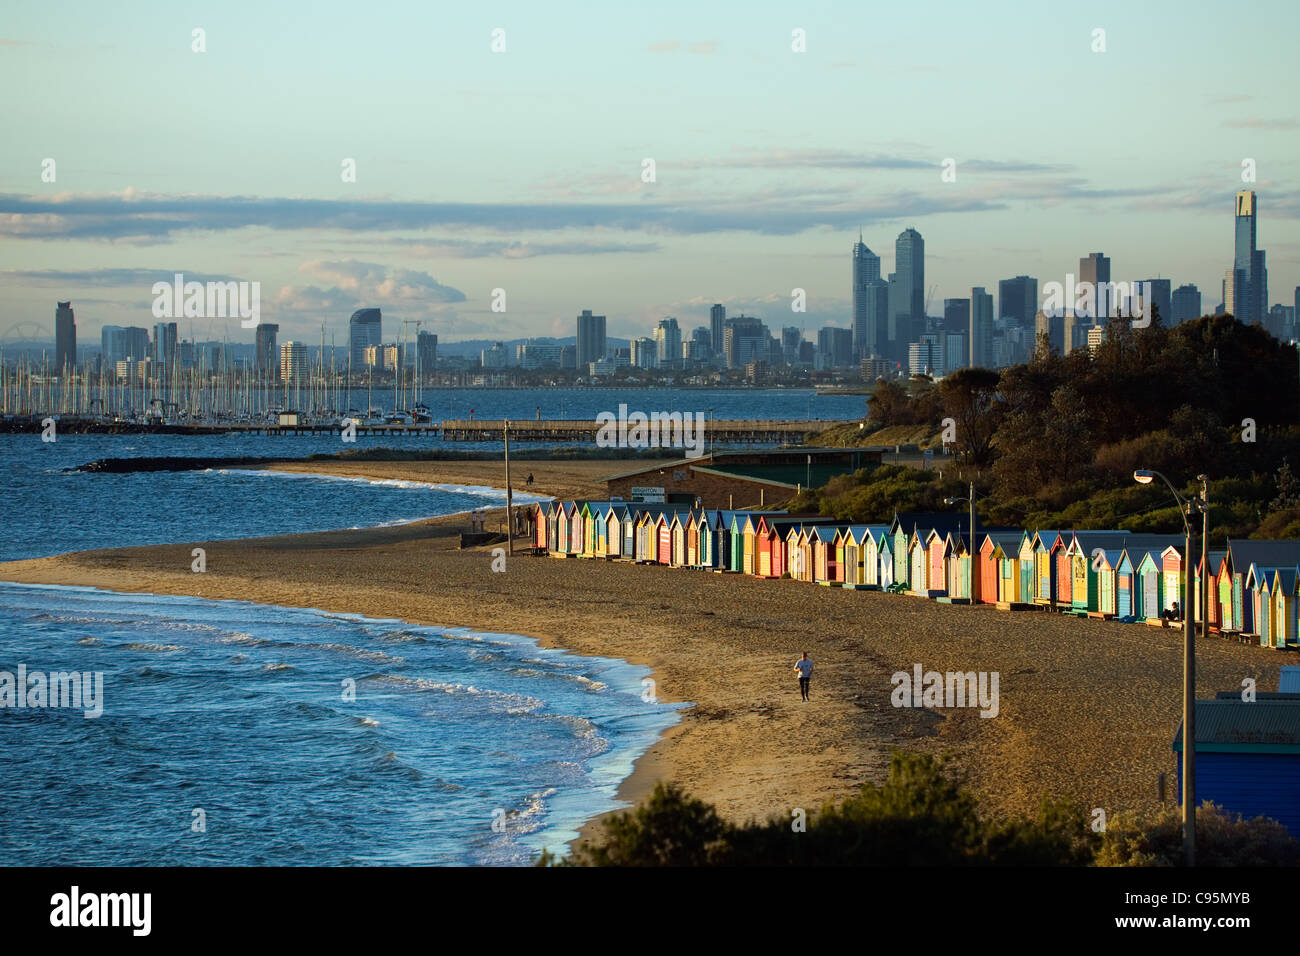 View of beach huts at Brighton Beach with city skyline in background.  Melbourne, Victoria, Australia Stock Photo